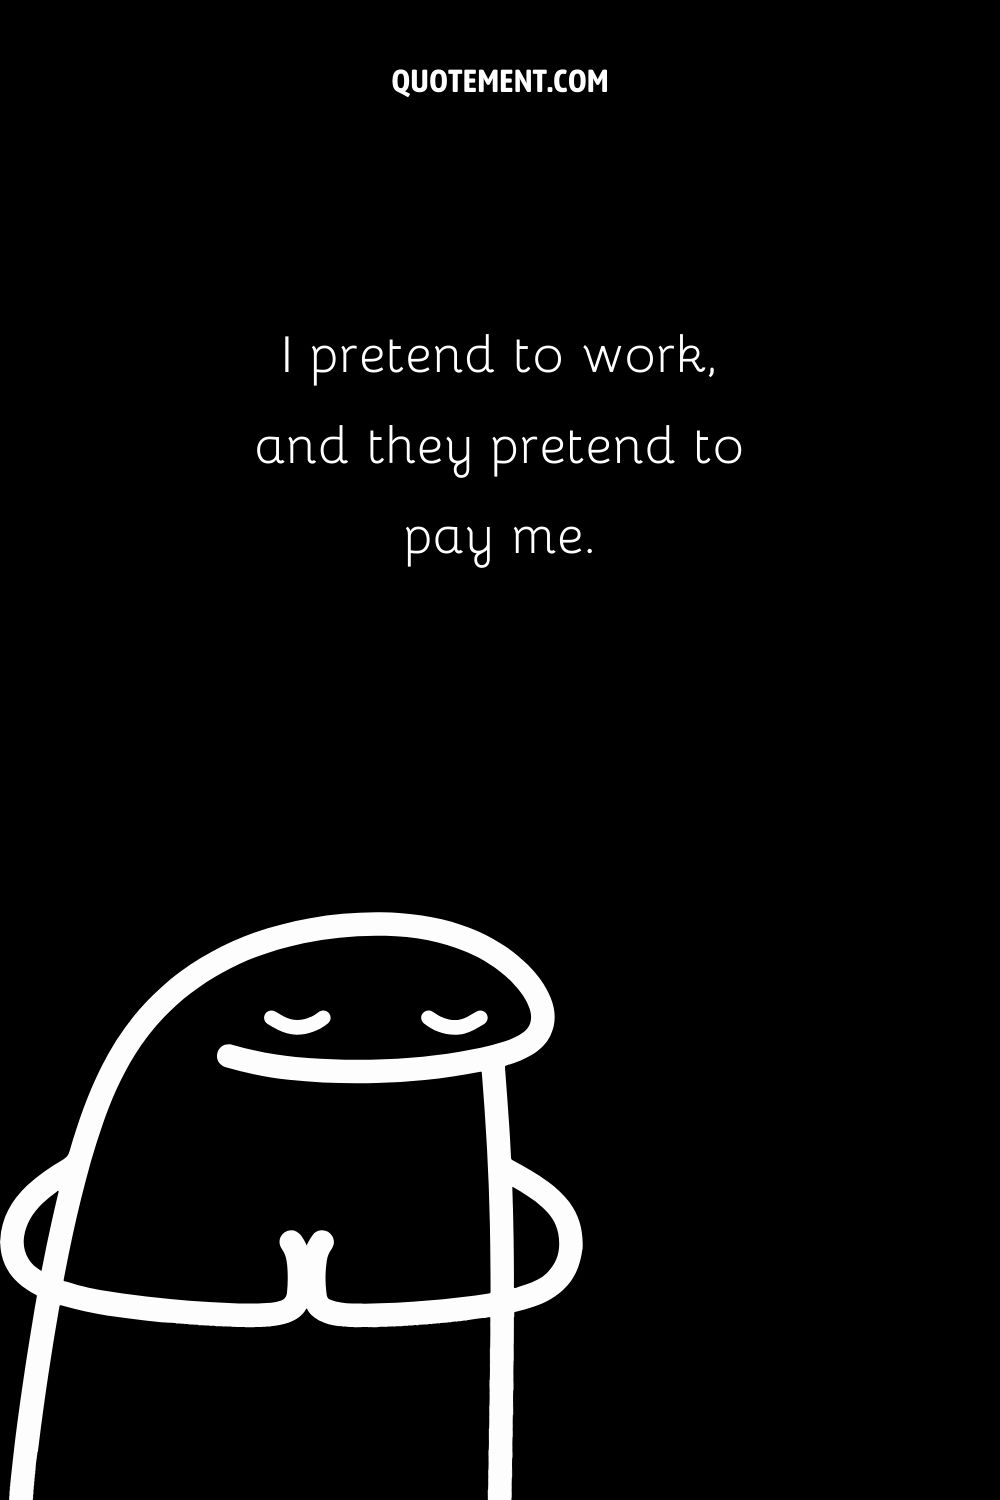 I pretend to work, and they pretend to pay me.